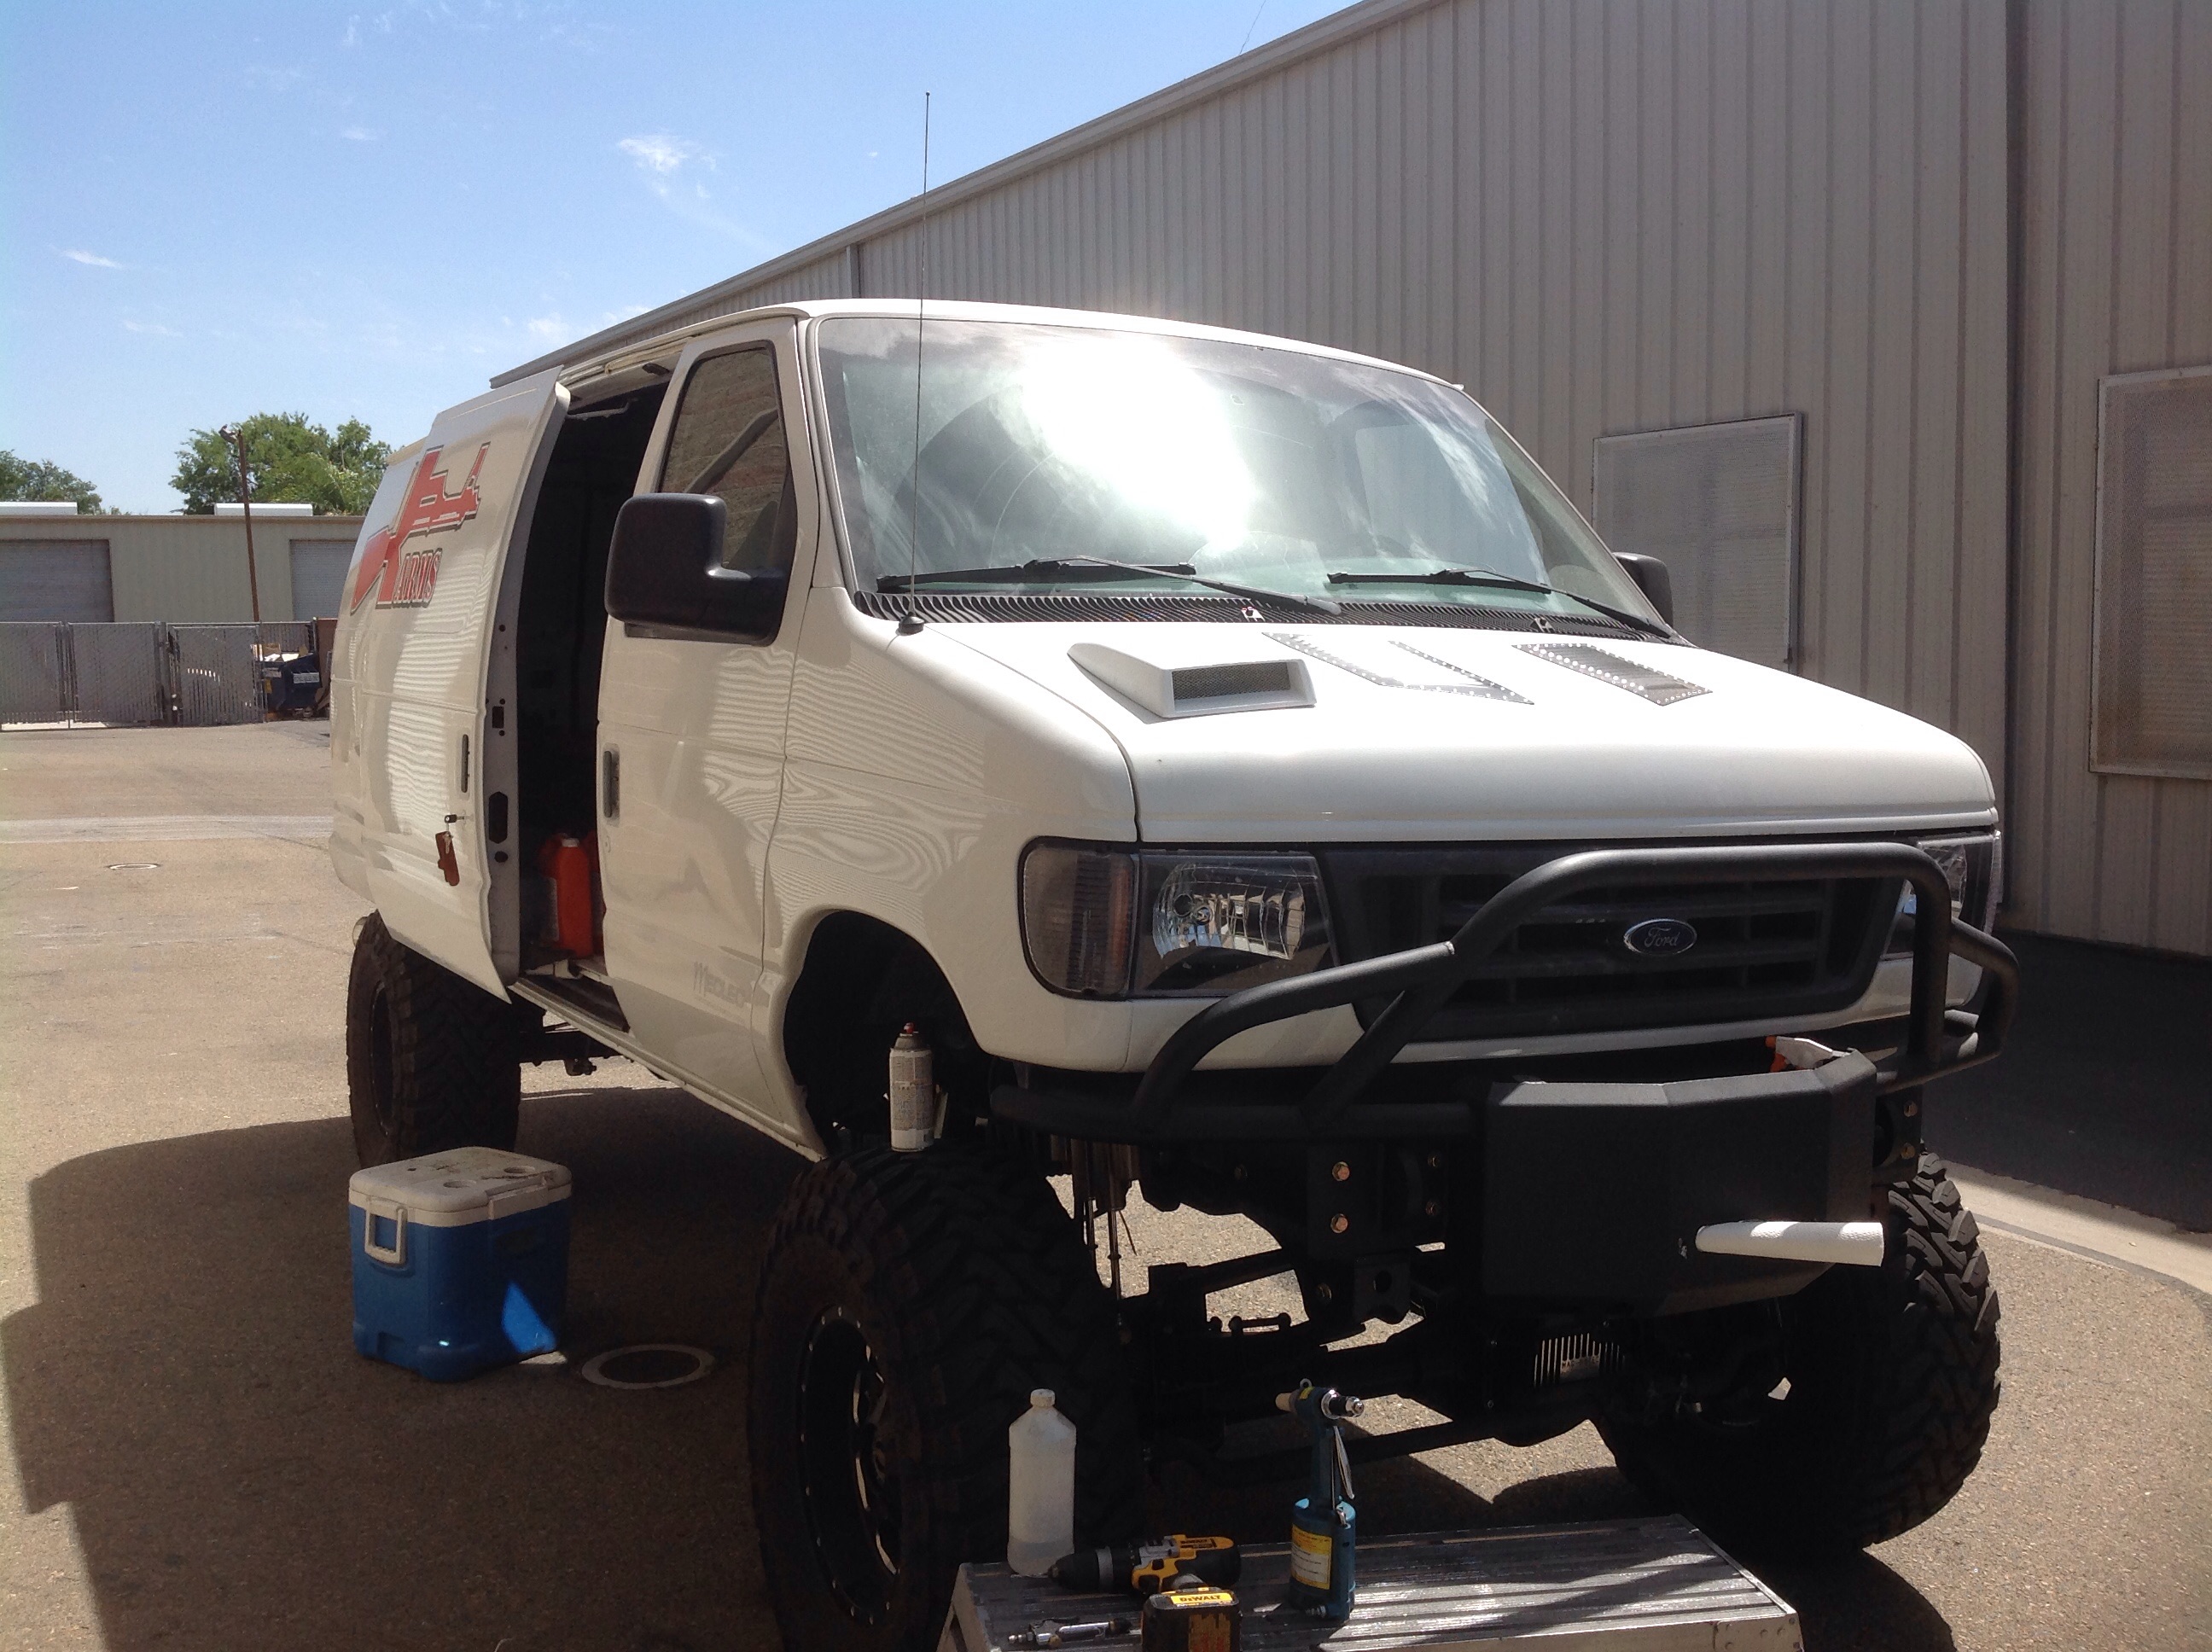 2003 Chevy Express 2500 Build. 